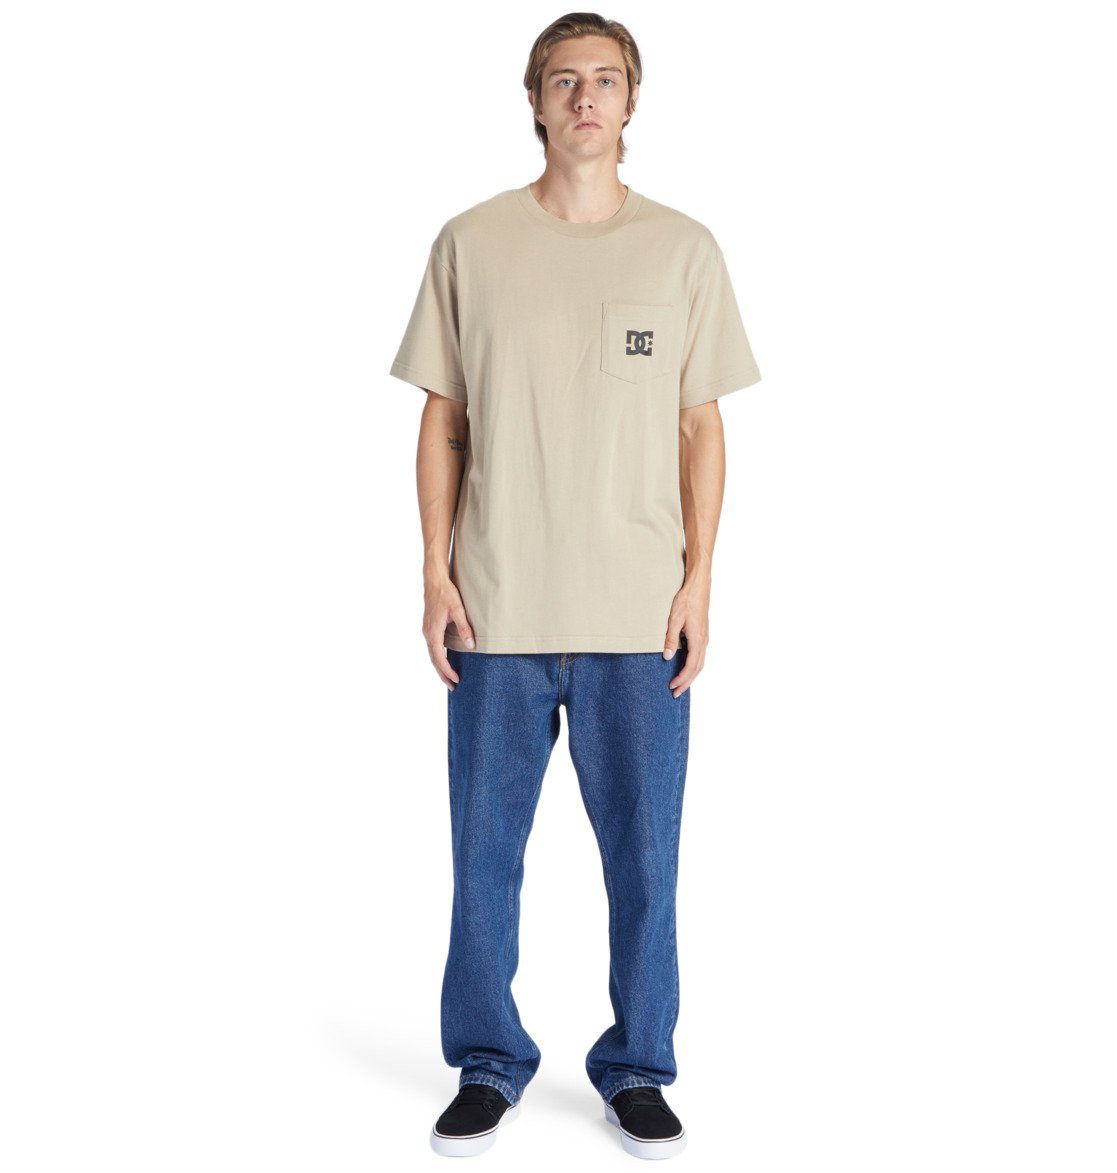 DC Shoes T-Shirt Taupe Plaza Star DC